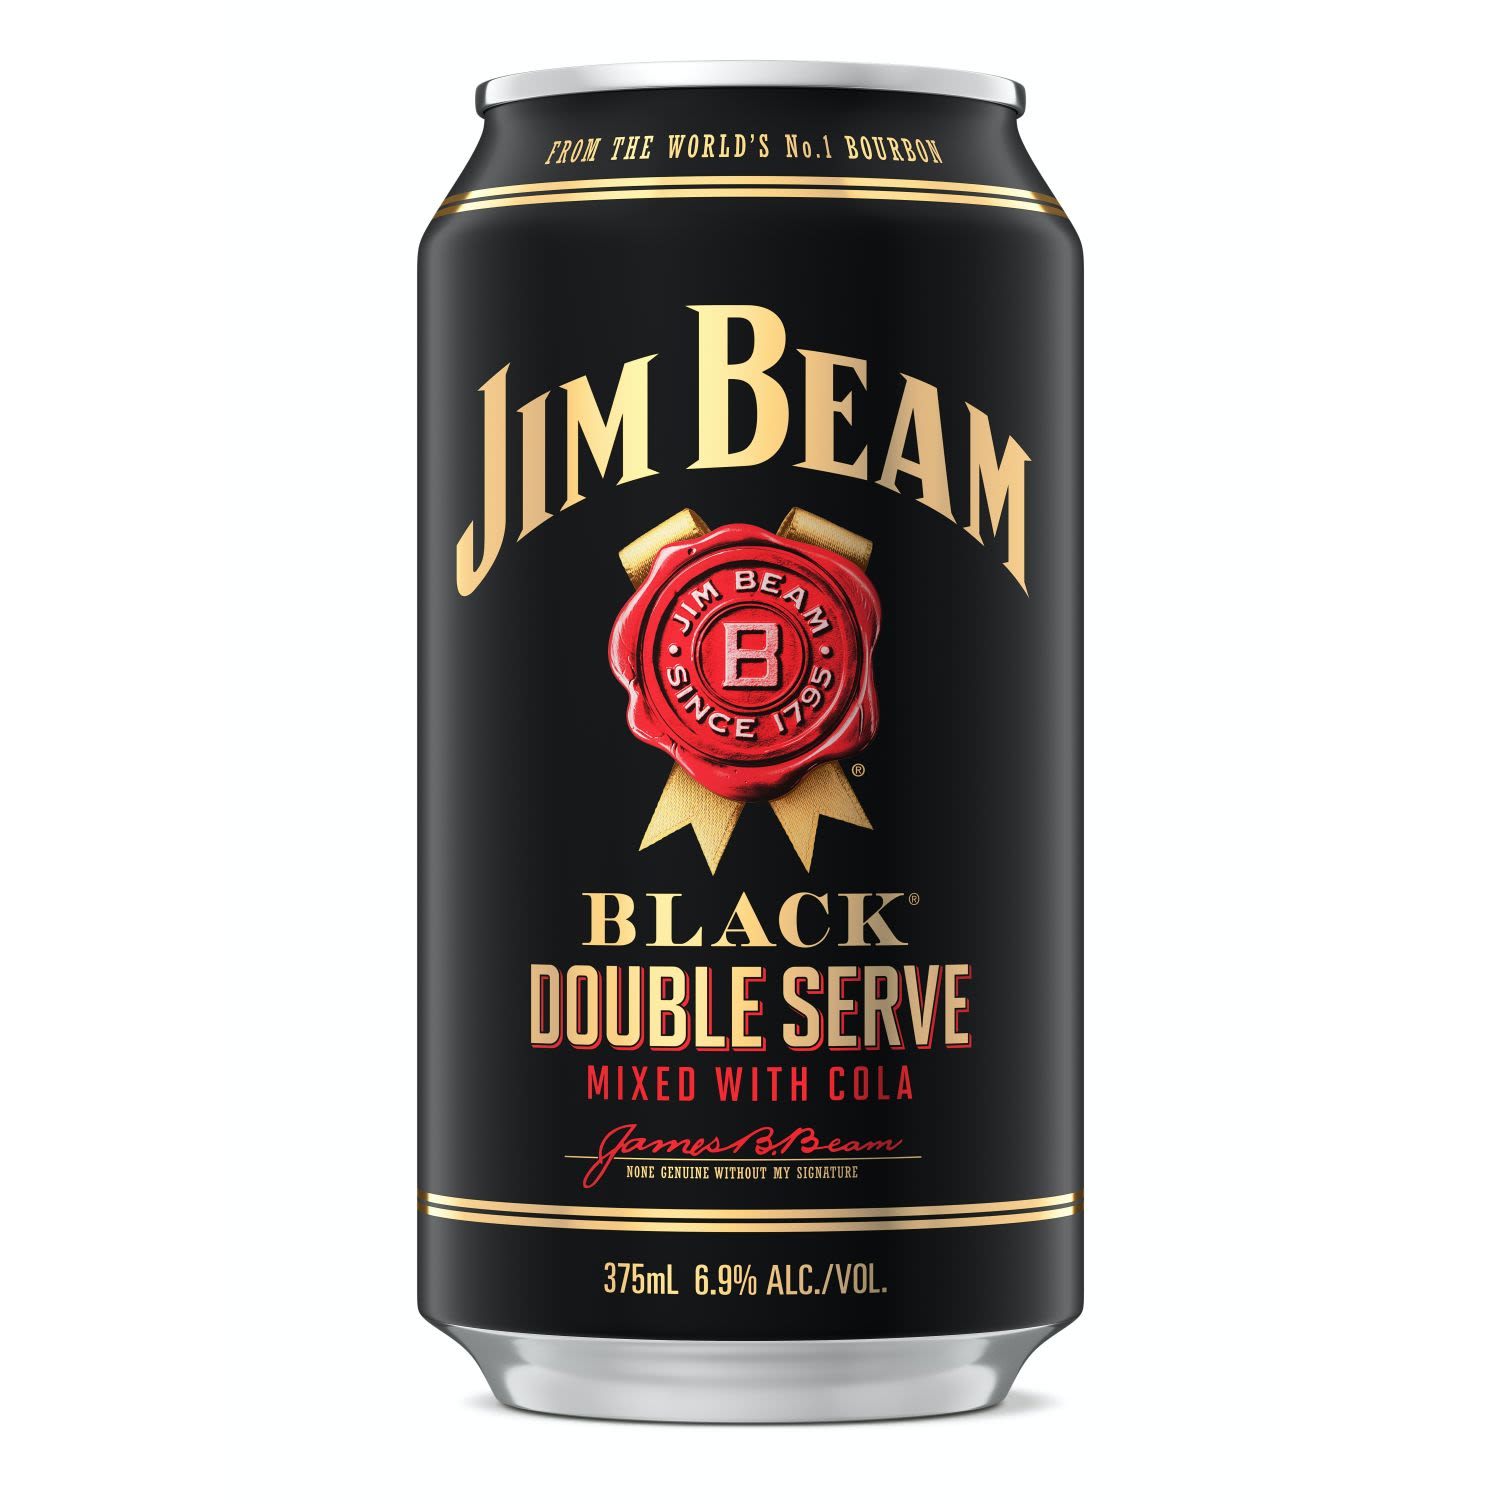 Jim Beam Black Double Serve delivers two servings of the premium, extra-aged Jim Beam Black Bourbon you love, pre-mixed with quality cola.<br /> <br />Alcohol Volume: 6.90%<br /><br />Pack Format: 30 Pack<br /><br />Standard Drinks: 2.1</br /><br />Pack Type: Can<br />